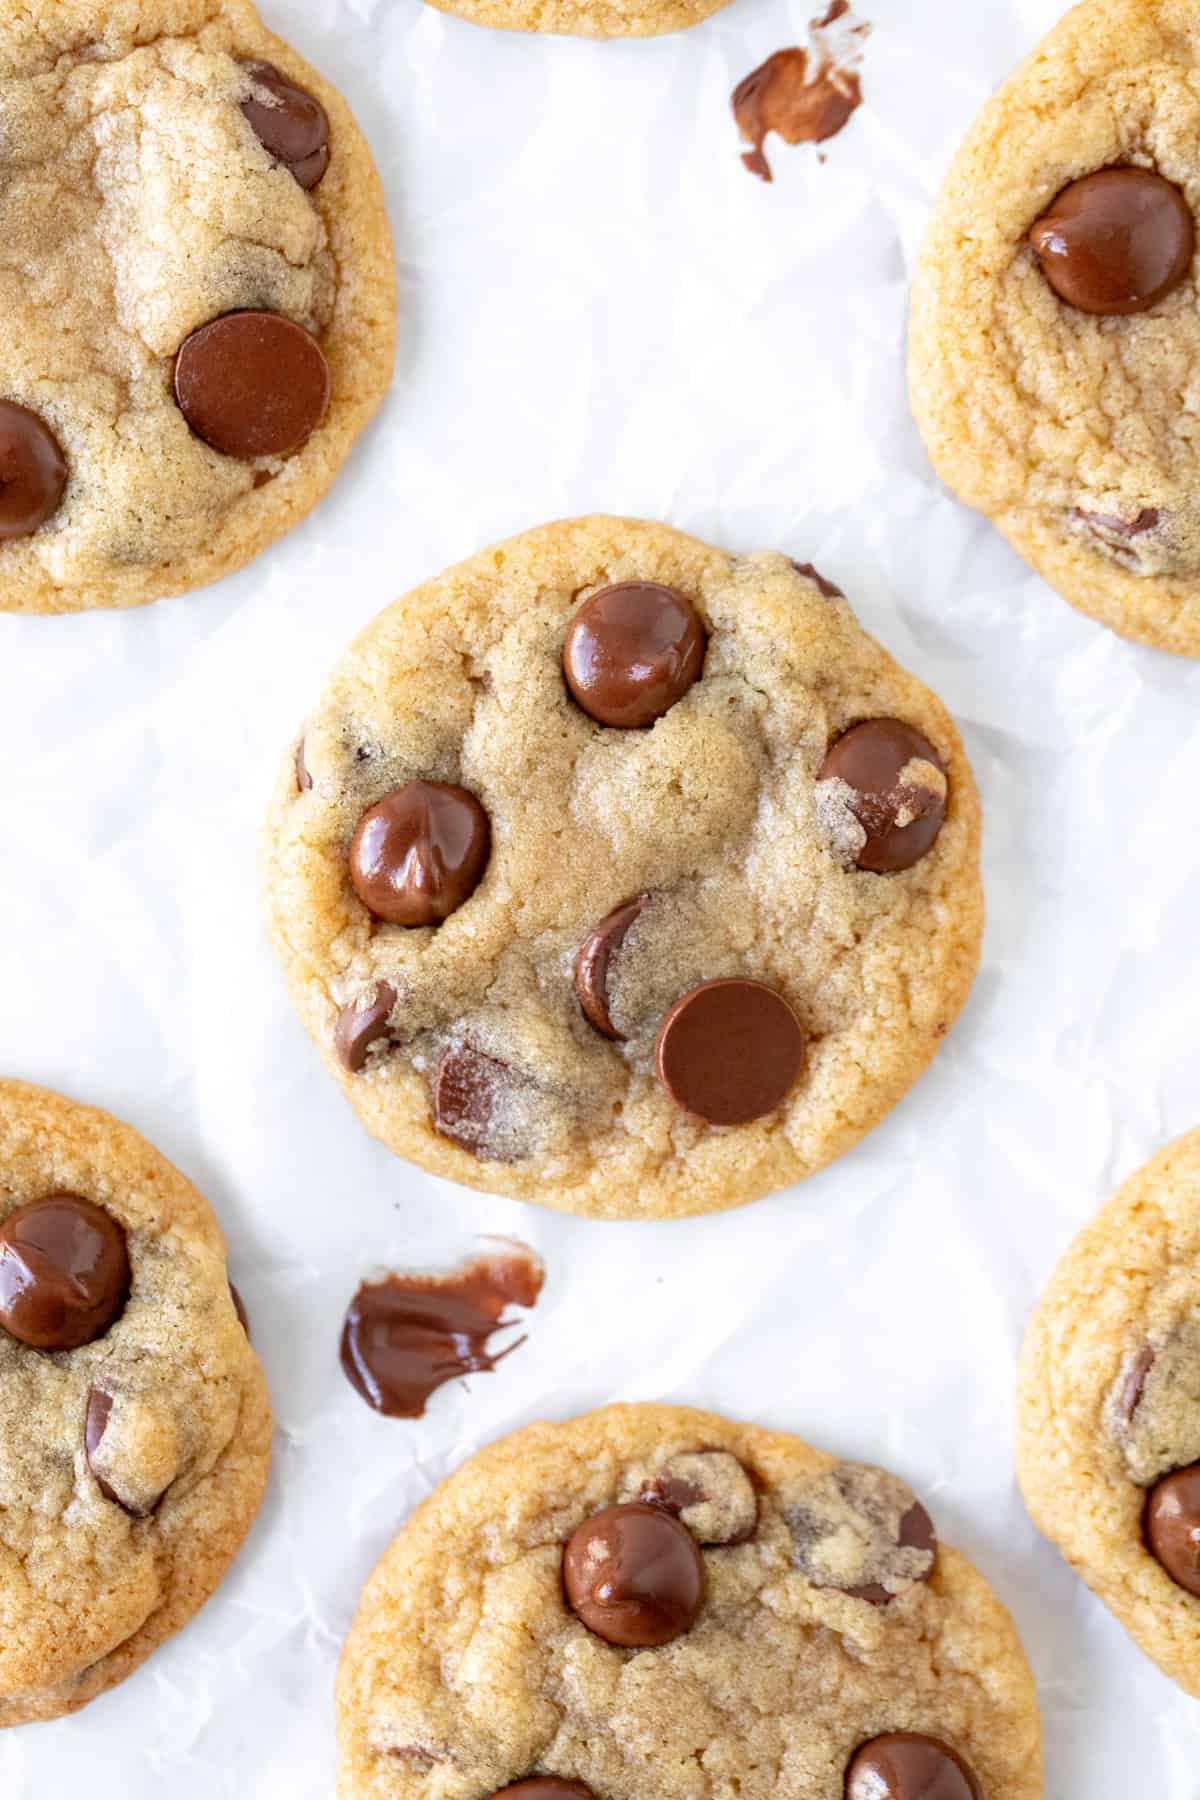 Mini chocolate chip cookies on baking paper